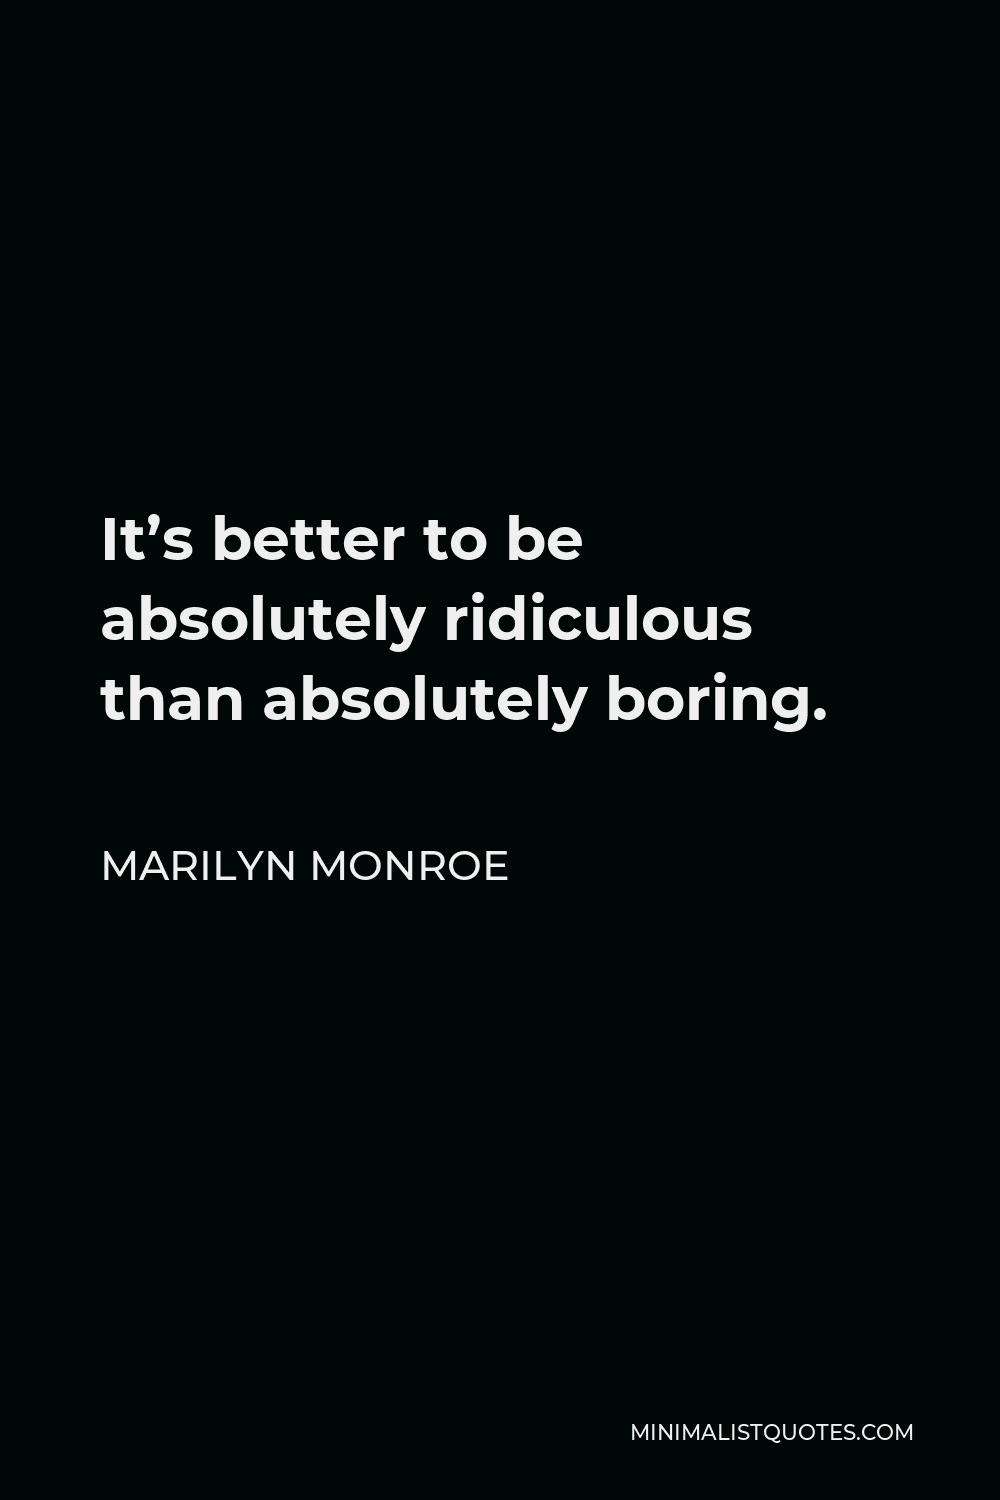 Marilyn Monroe Quote - It’s better to be absolutely ridiculous than absolutely boring.